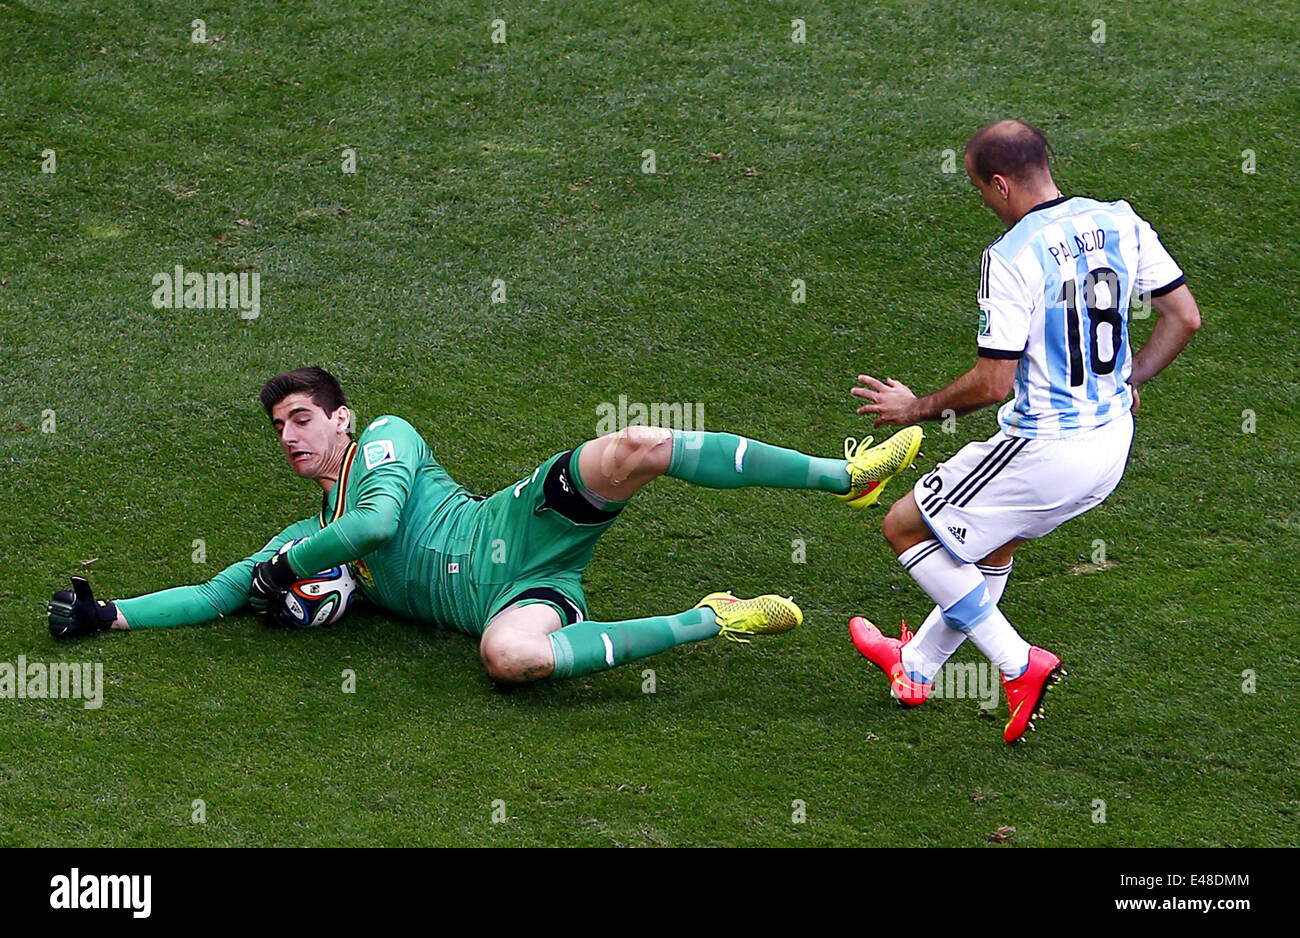 Brasilia, Brazil. 5th July, 2014. Belgium's goalkeeper Thibaut Courtois (L) blocks the ball during a quarter-finals match between Argentina and Belgium of 2014 FIFA World Cup at the Estadio Nacional Stadium in Brasilia, Brazil, on July 5, 2014. Argentina won 1-0 over Belgium and qualified for the semi-finals. Credit:  Liu Bin/Xinhua/Alamy Live News Stock Photo